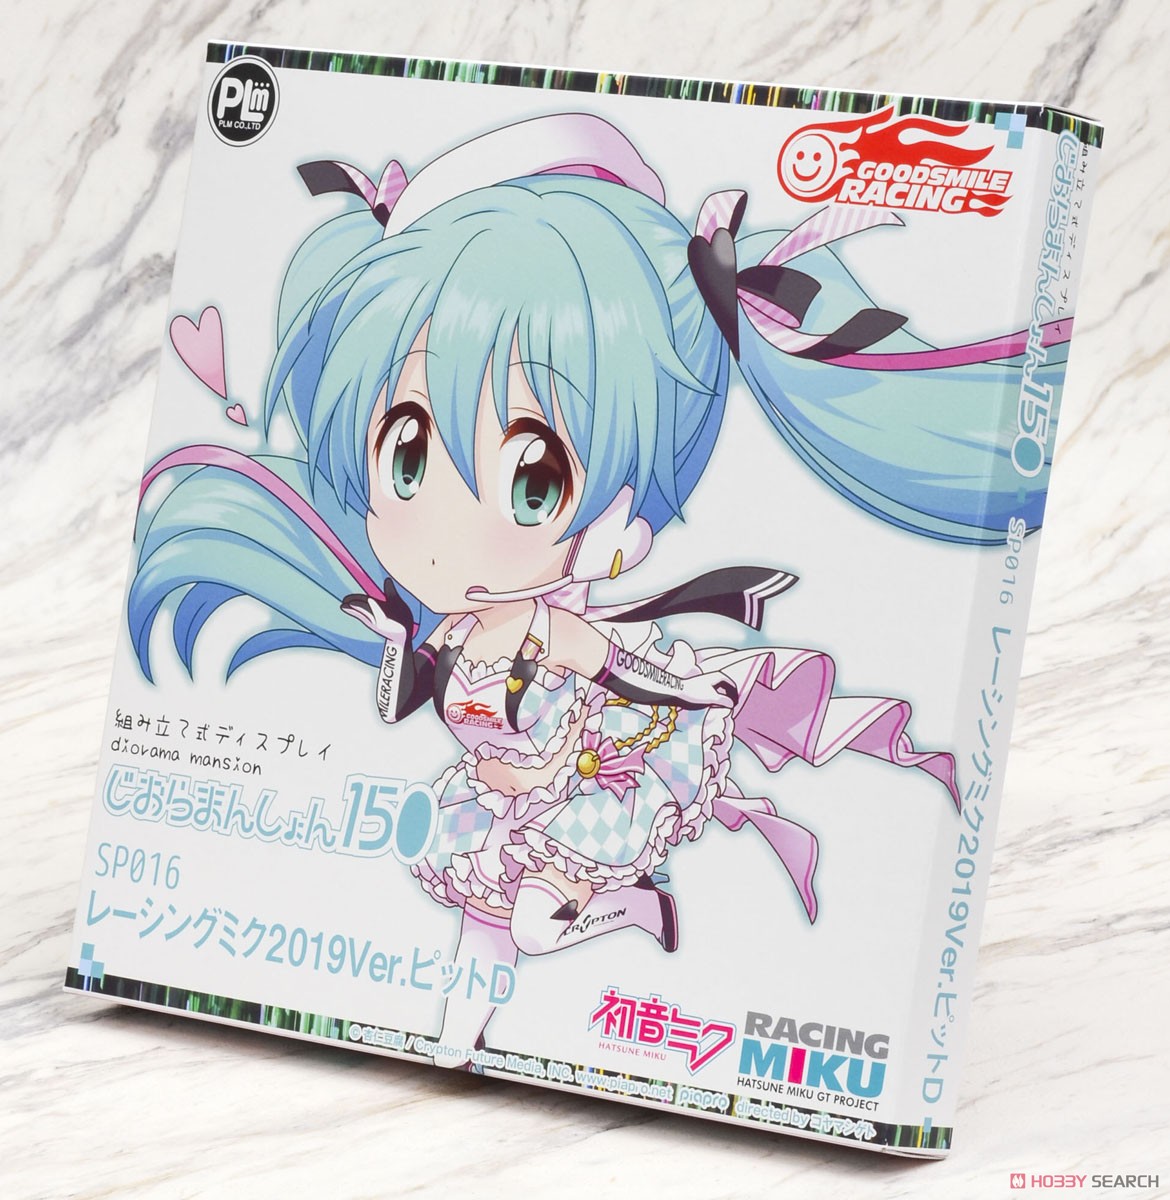 Dioramansion 150: Racing Miku 2019 Ver. Pit D (Anime Toy) Package1